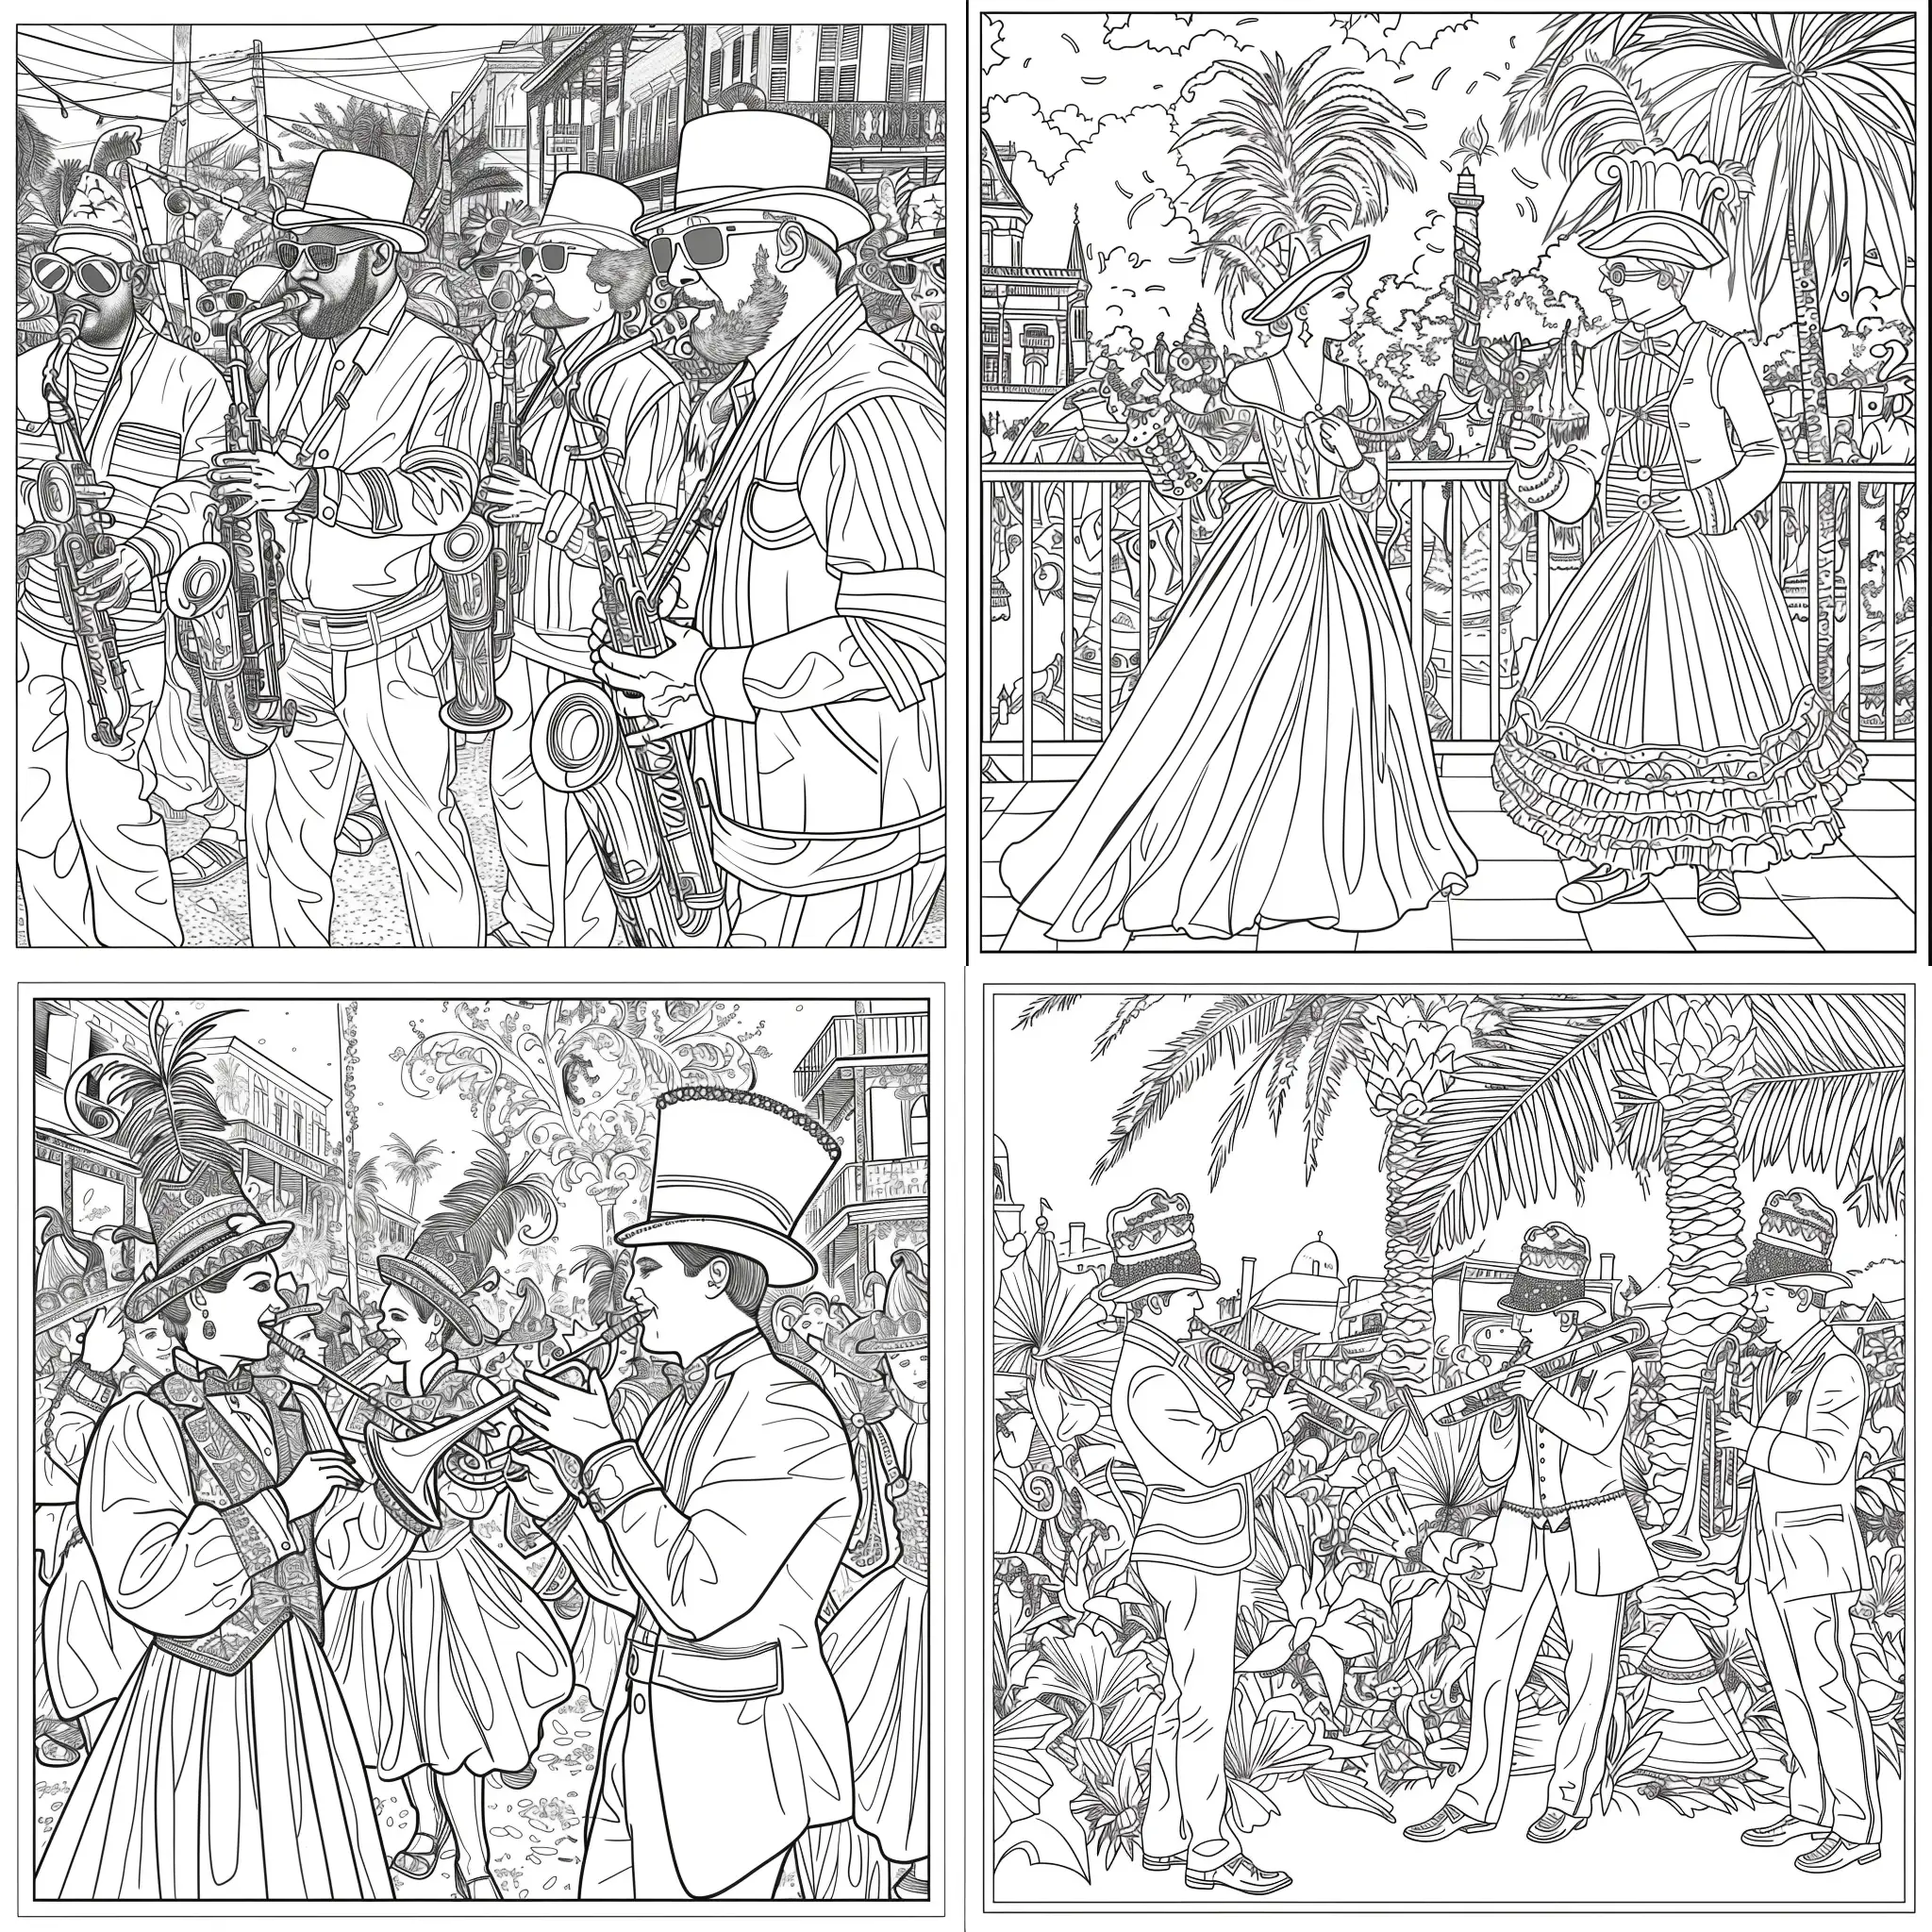 Imagine a coloring book page for 8.5 x 11, no background, no frame, New Orleans Mardi Gras scene
